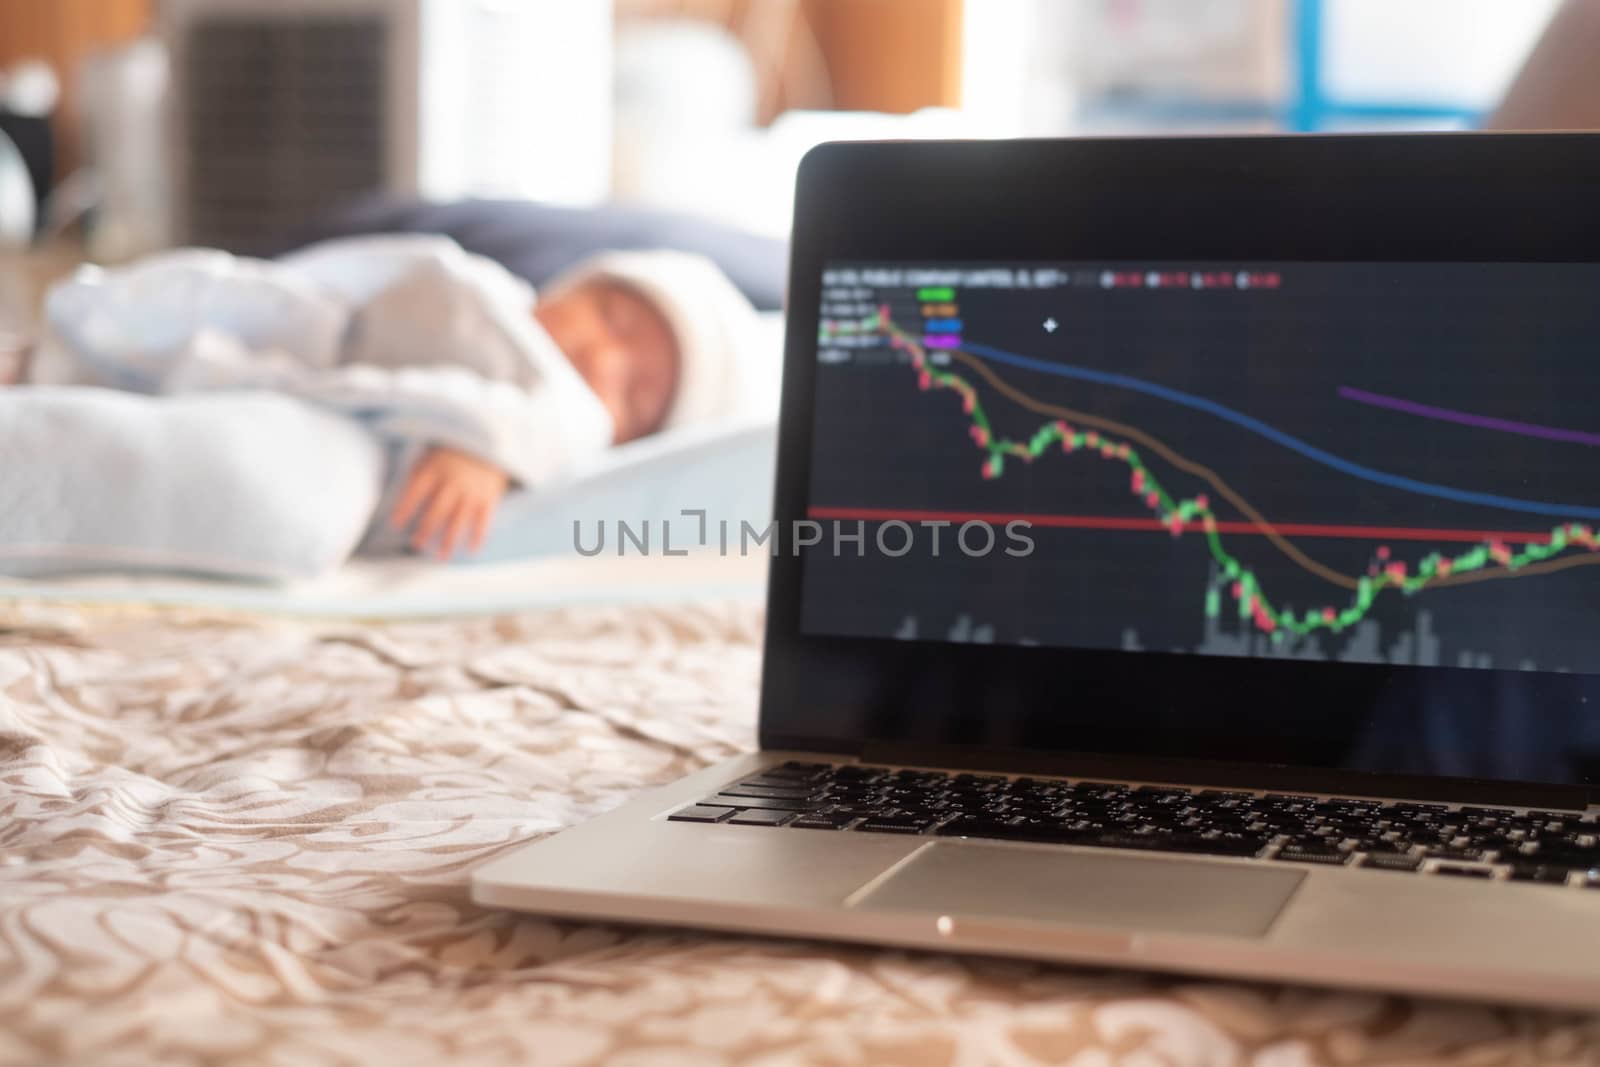 Soft focus on laptop stock display screen .The parents father Stock trader trading stock on his laptop while his newborn infant baby sleep on the bed